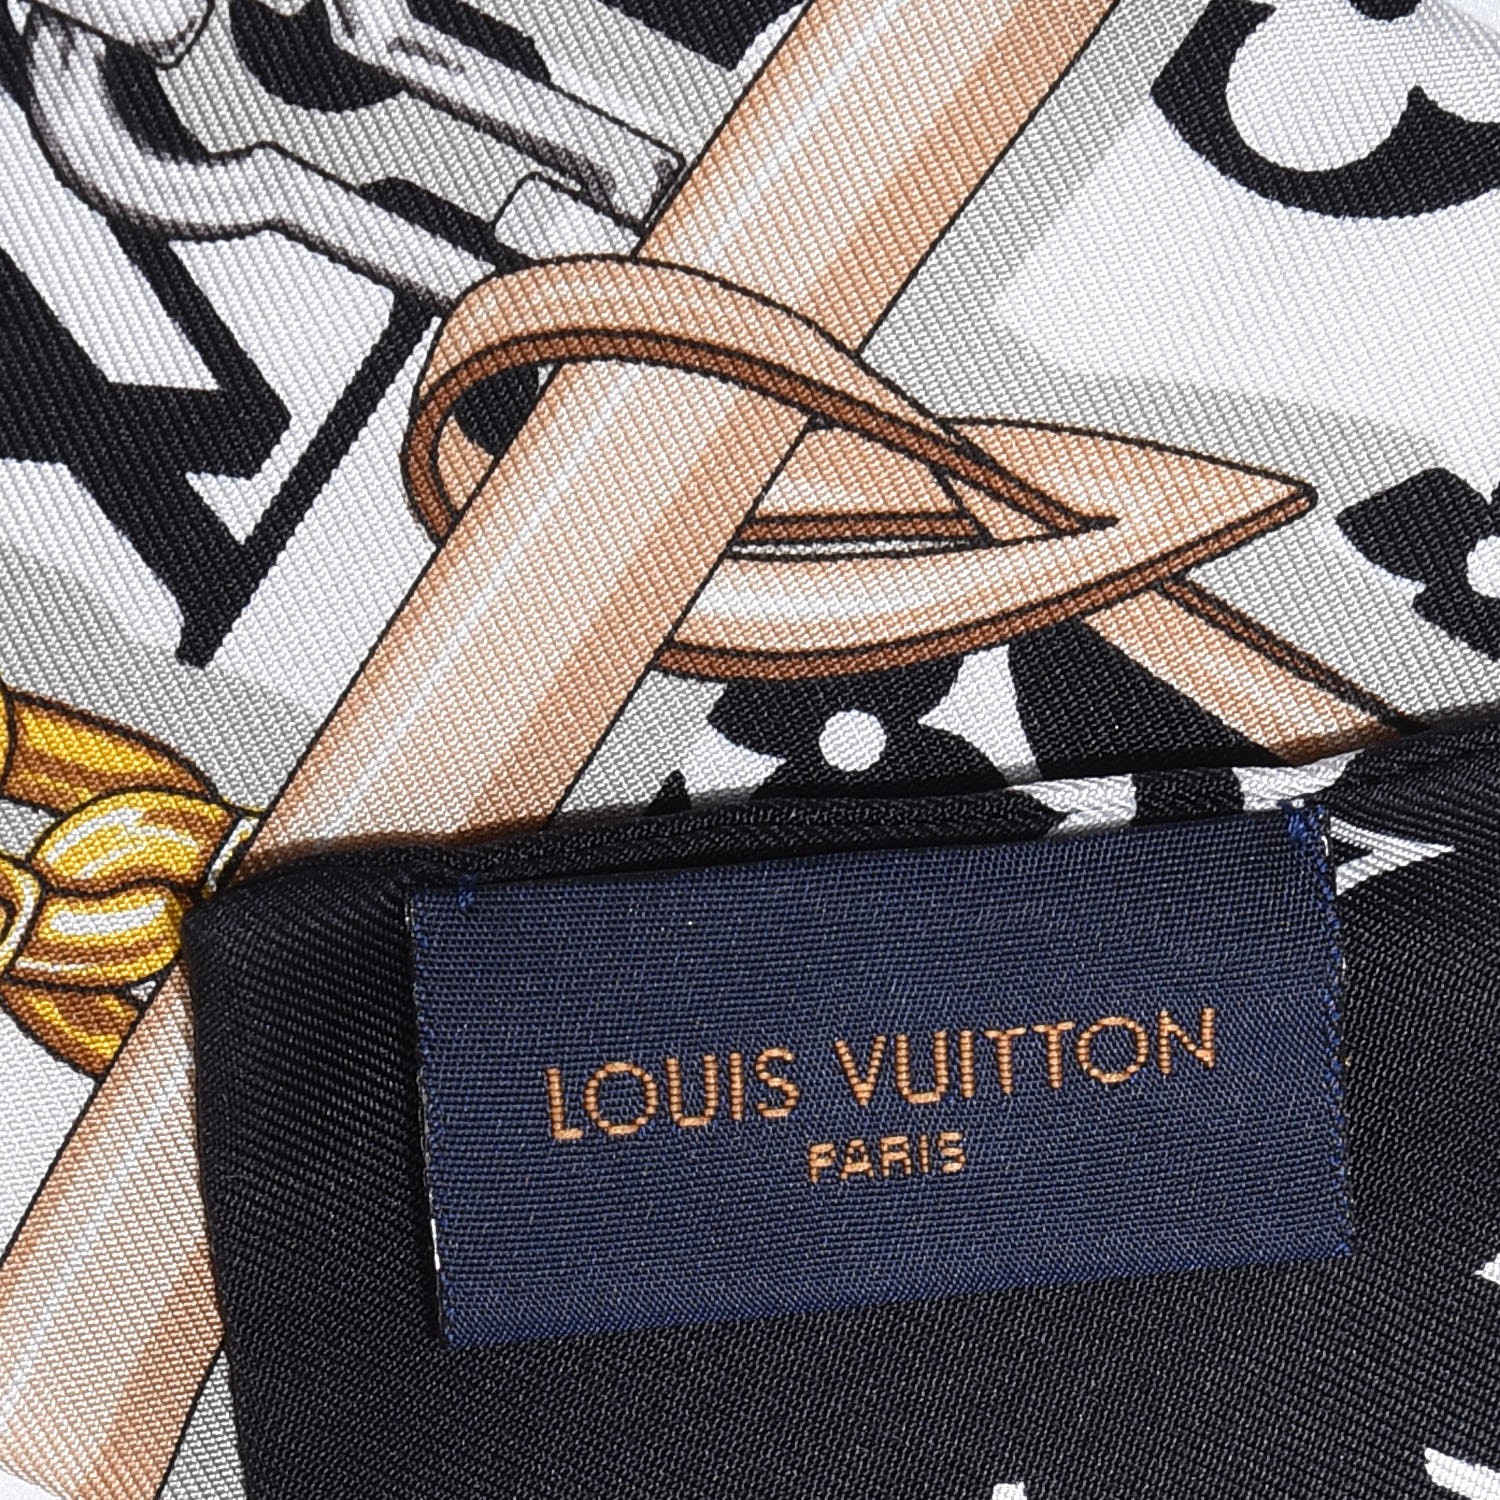 Louis Vuitton Bag Charm and Key Holder Flying Cat Catogram Gold in